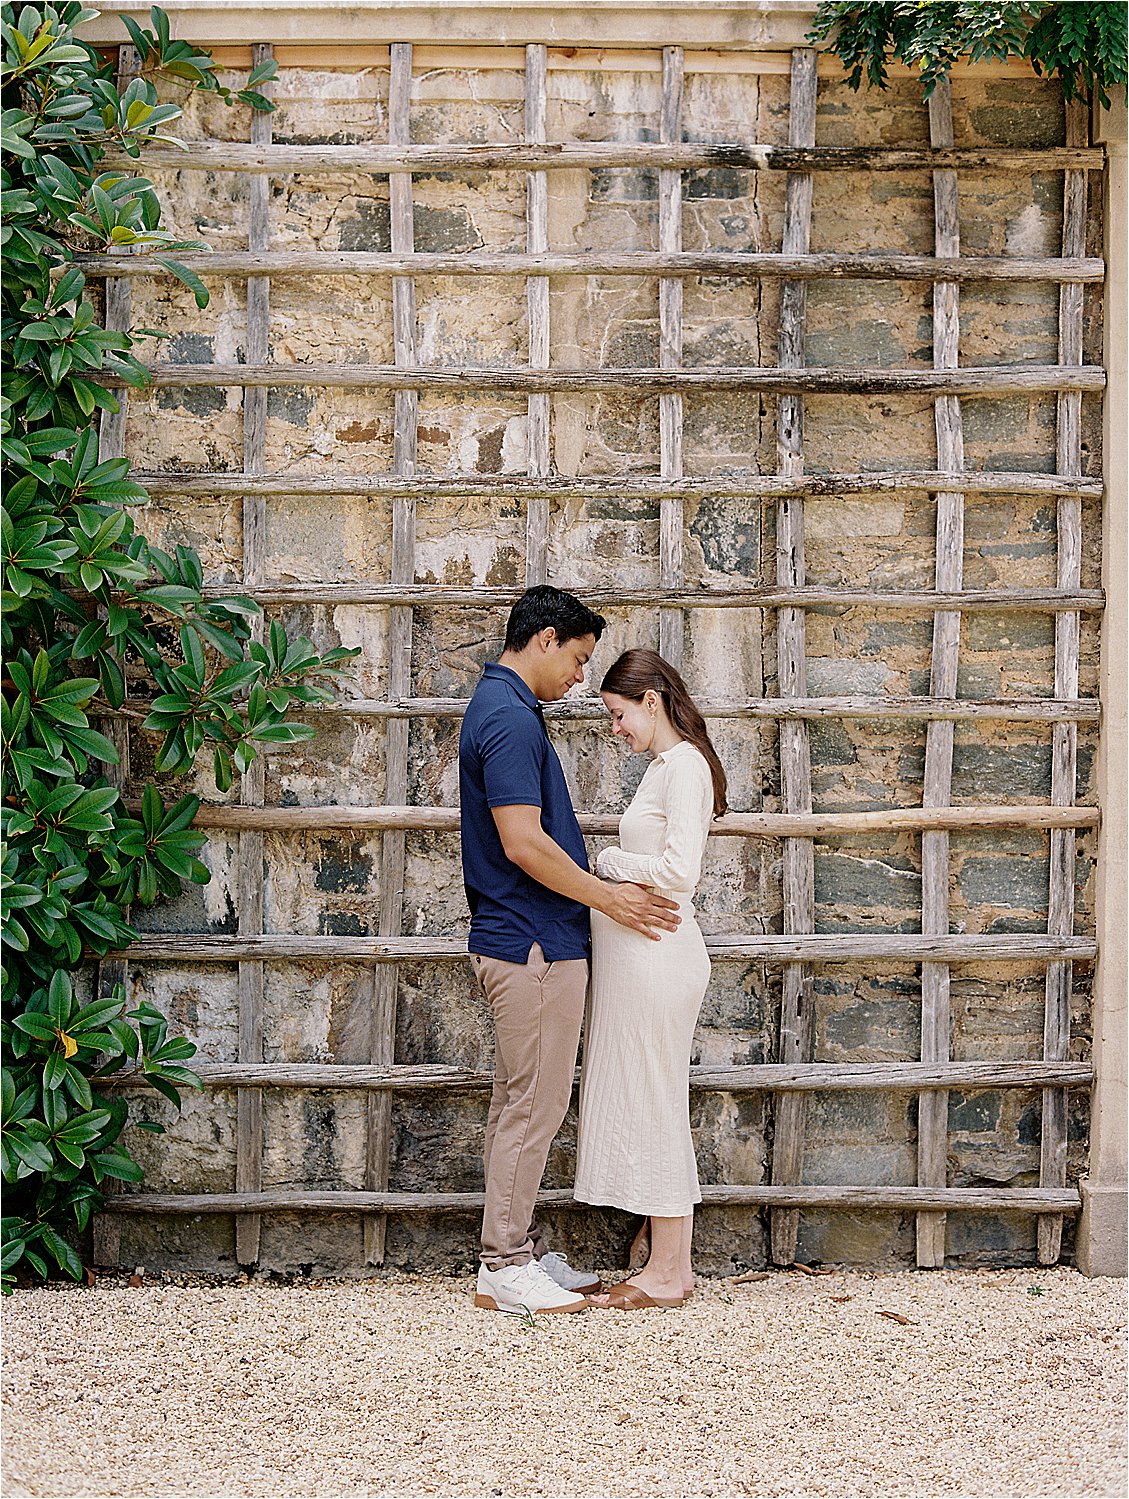 Summer Maternity Session in DC Garden with film photographer, Renee Hollingshead